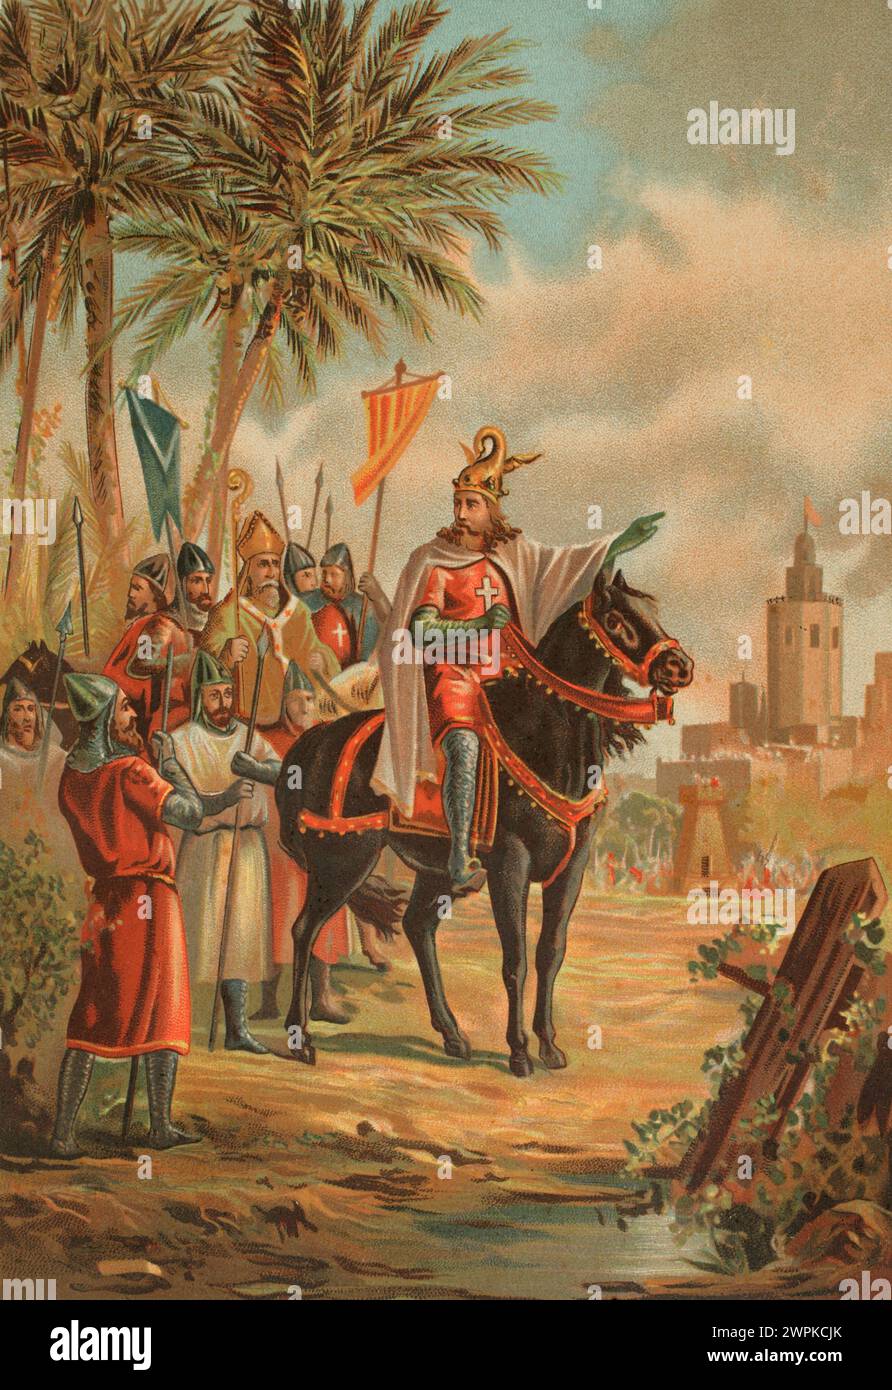 James I the Conqueror (1208-1276). Count of Barcelona and King of Aragon (1213-1276), Valencia (1239-1276) and Majorca (1229-1276). Conquest of Valencia. King James I at the siege of the city of Valencia, 1238. Chromolithography. 'Glorias Españolas' (Glories of Spain). Volume II. Published in Barcelona, 1890. Stock Photo